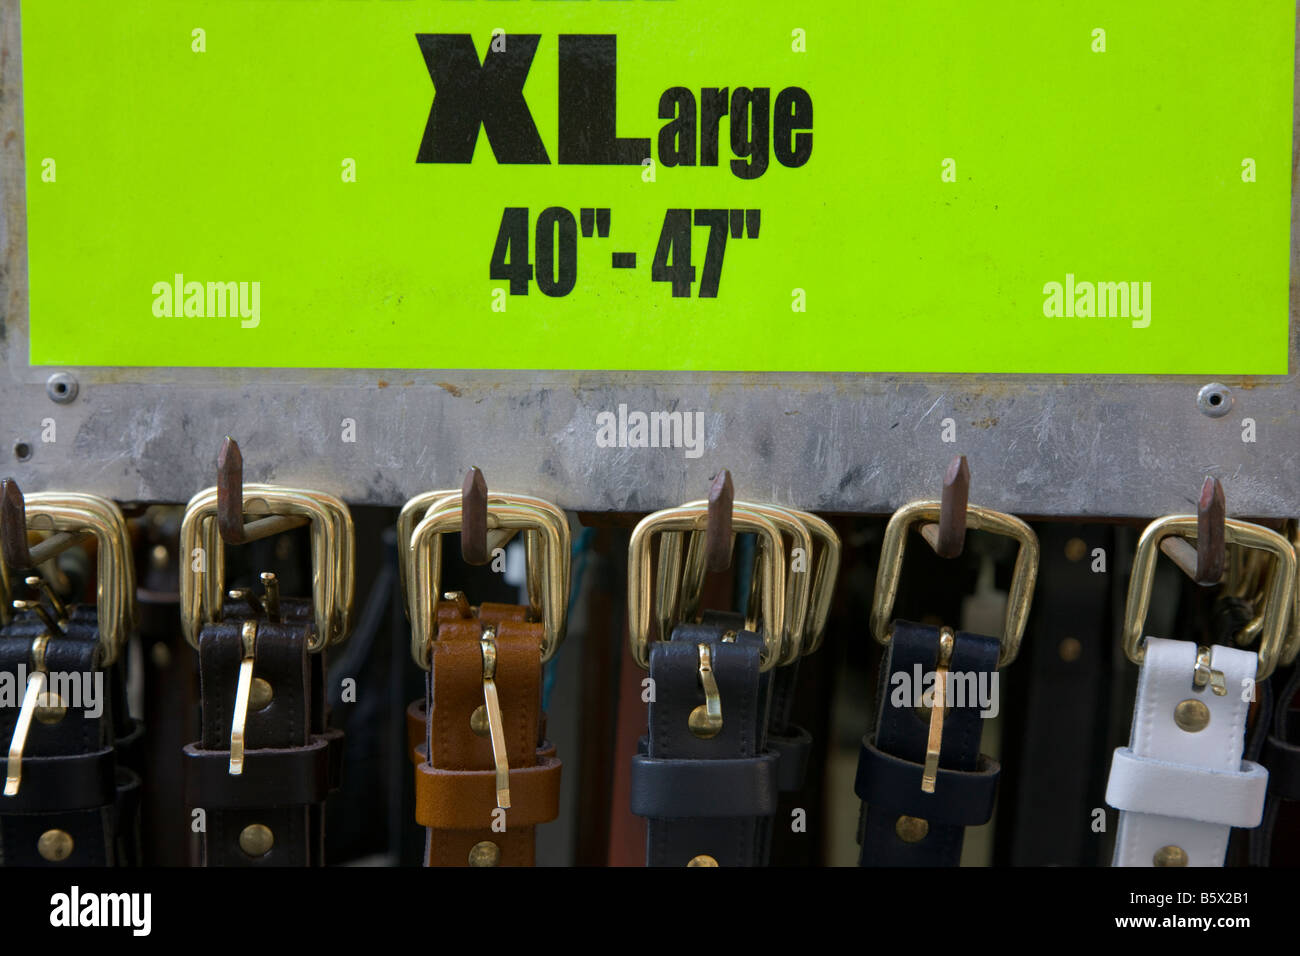 Row of XLarge leather belts on a market stall Stock Photo